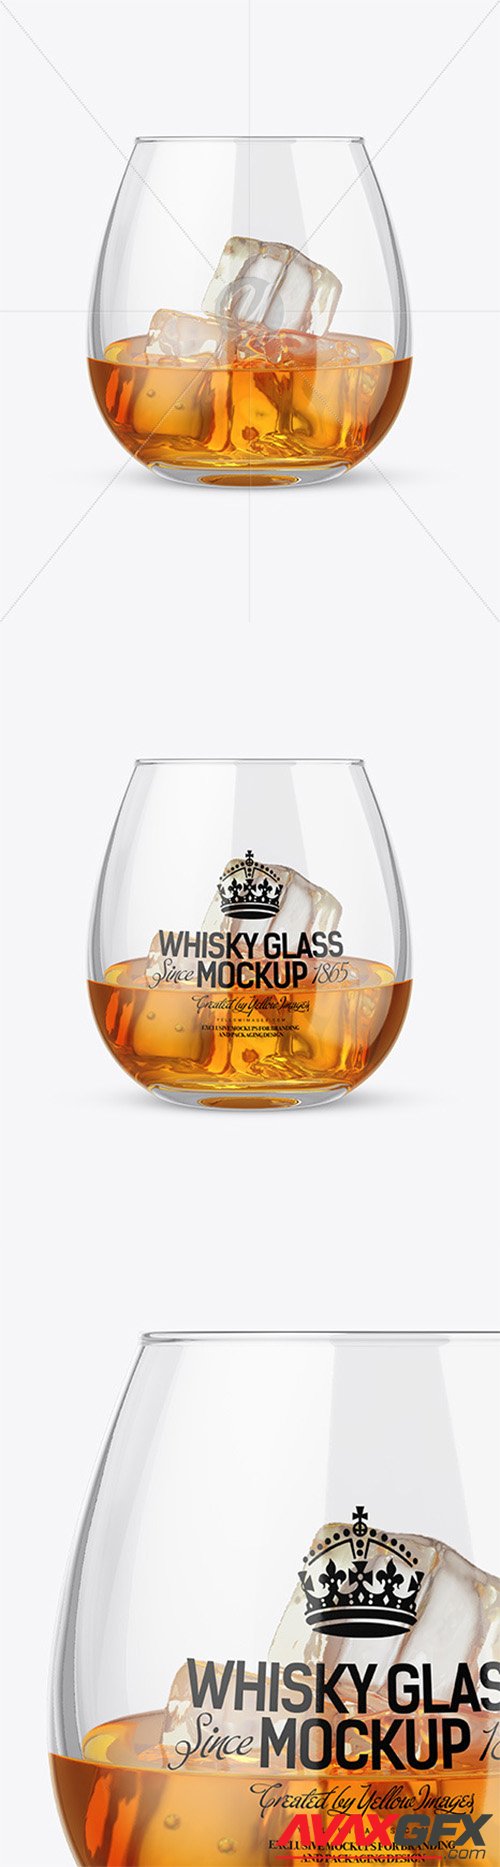 Whisky Glass With Ice Cubes Mockup 58004